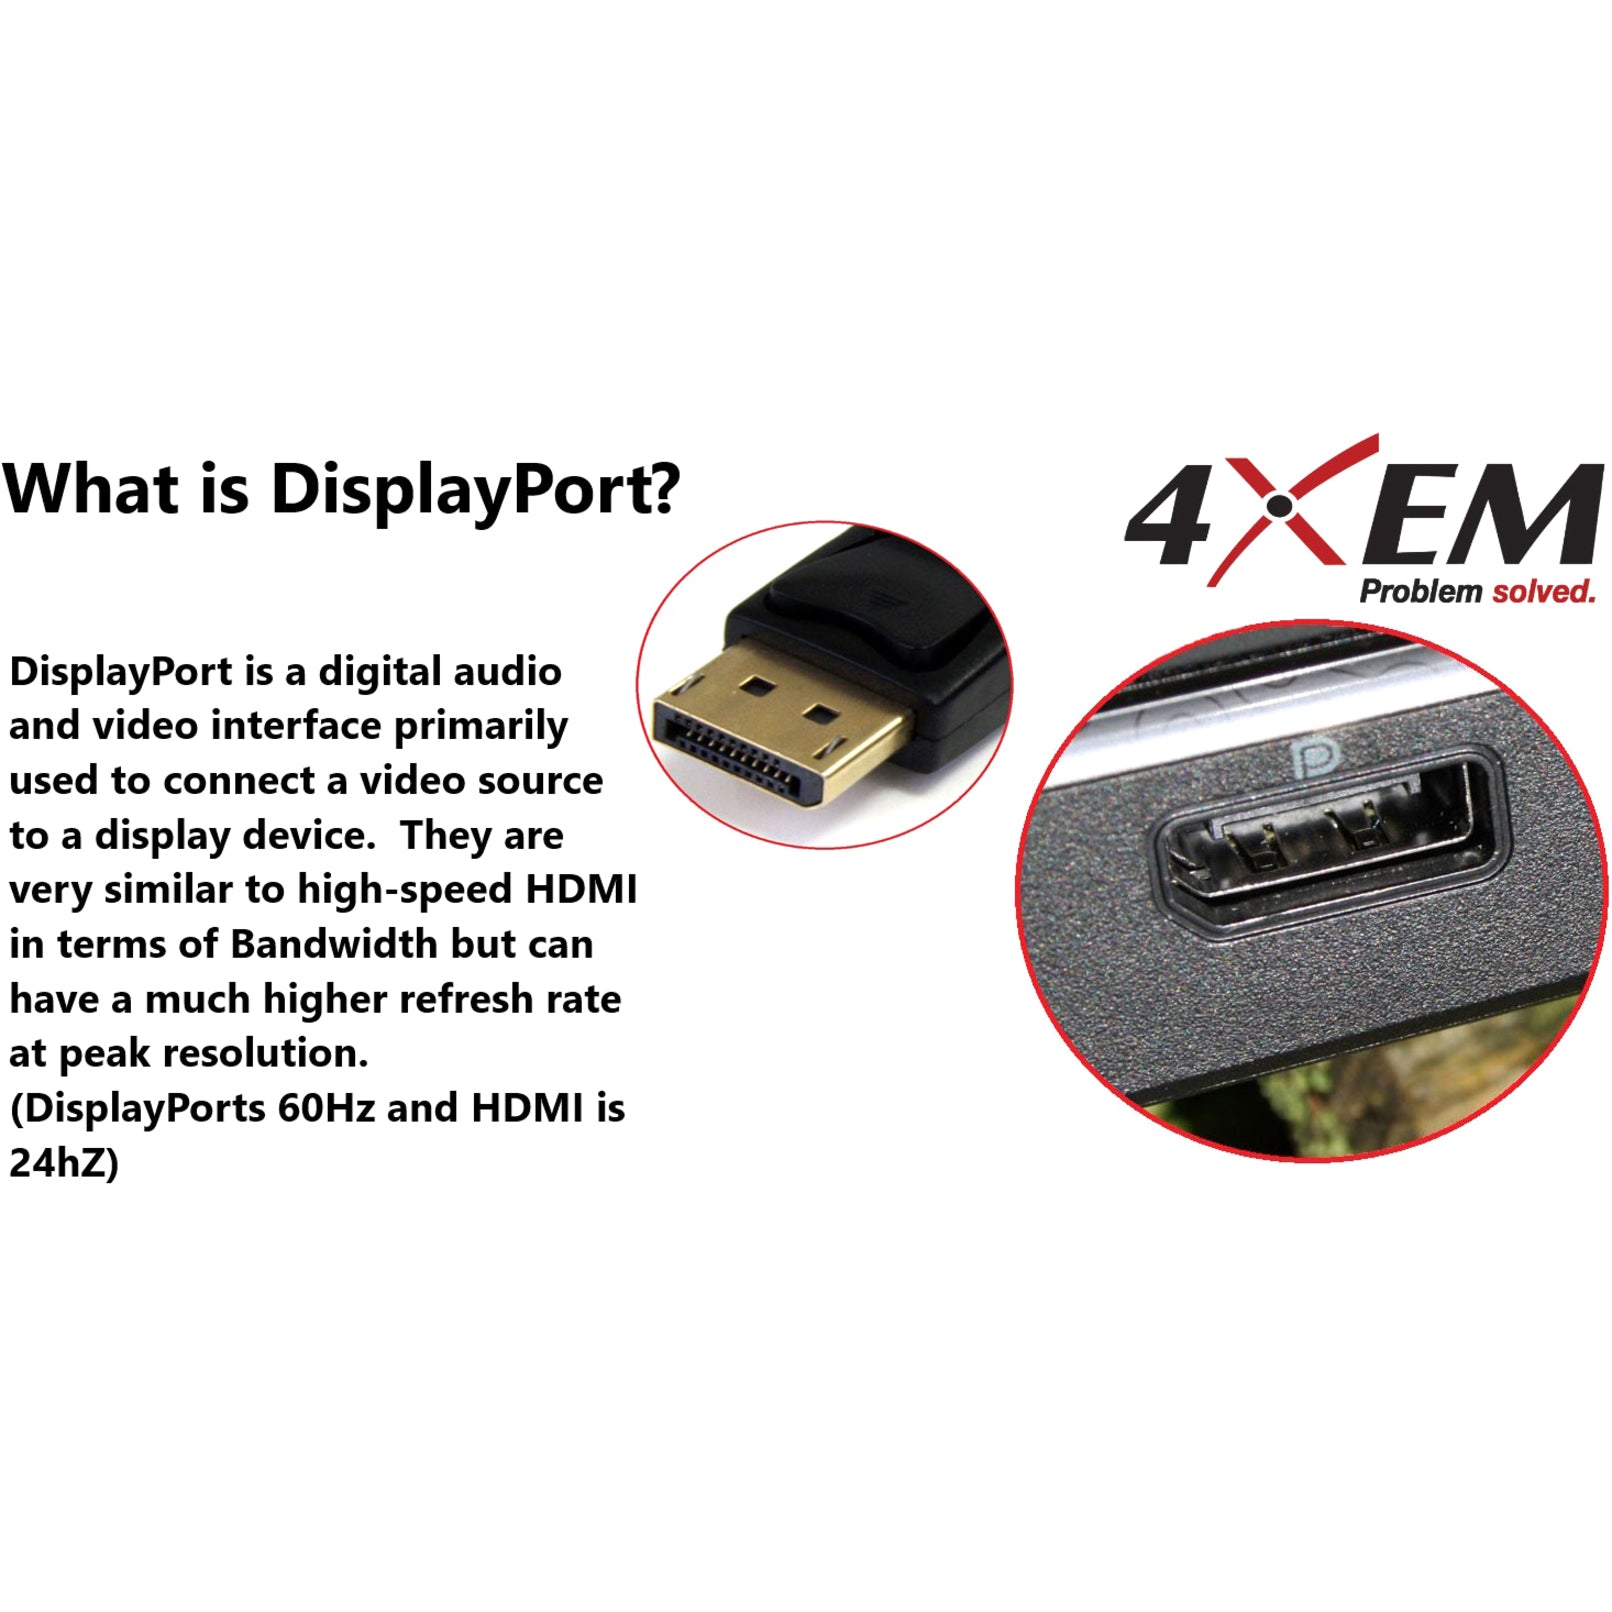 4XEM 4XDPMVGAMCBL High Speed DisplayPort to VGA Adapter Cable, 6ft, Active, 1920 x 1200 Resolution